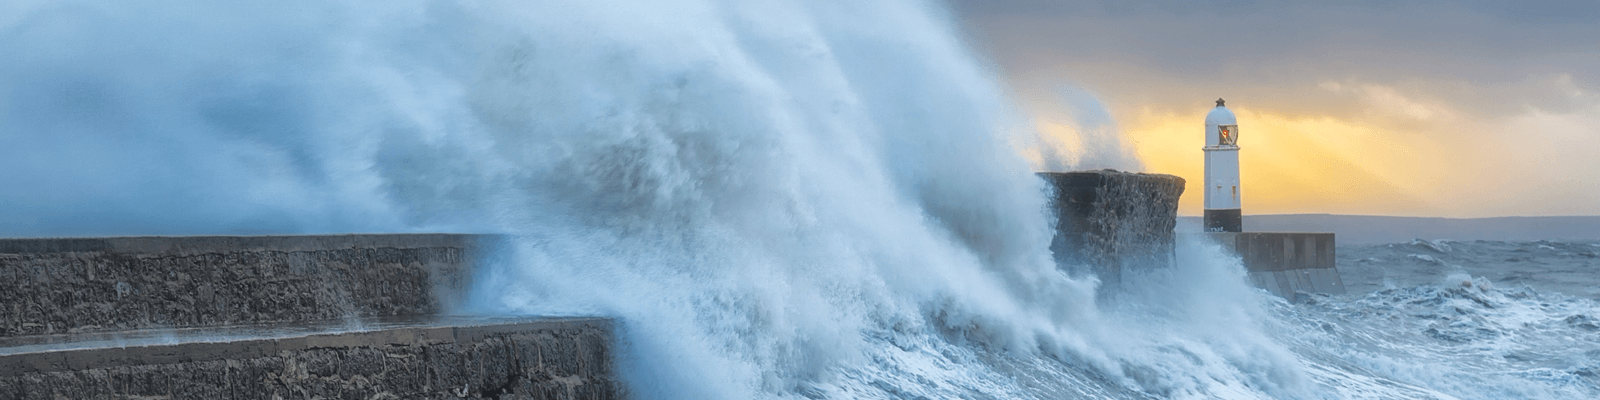 A large wave hitting a dock